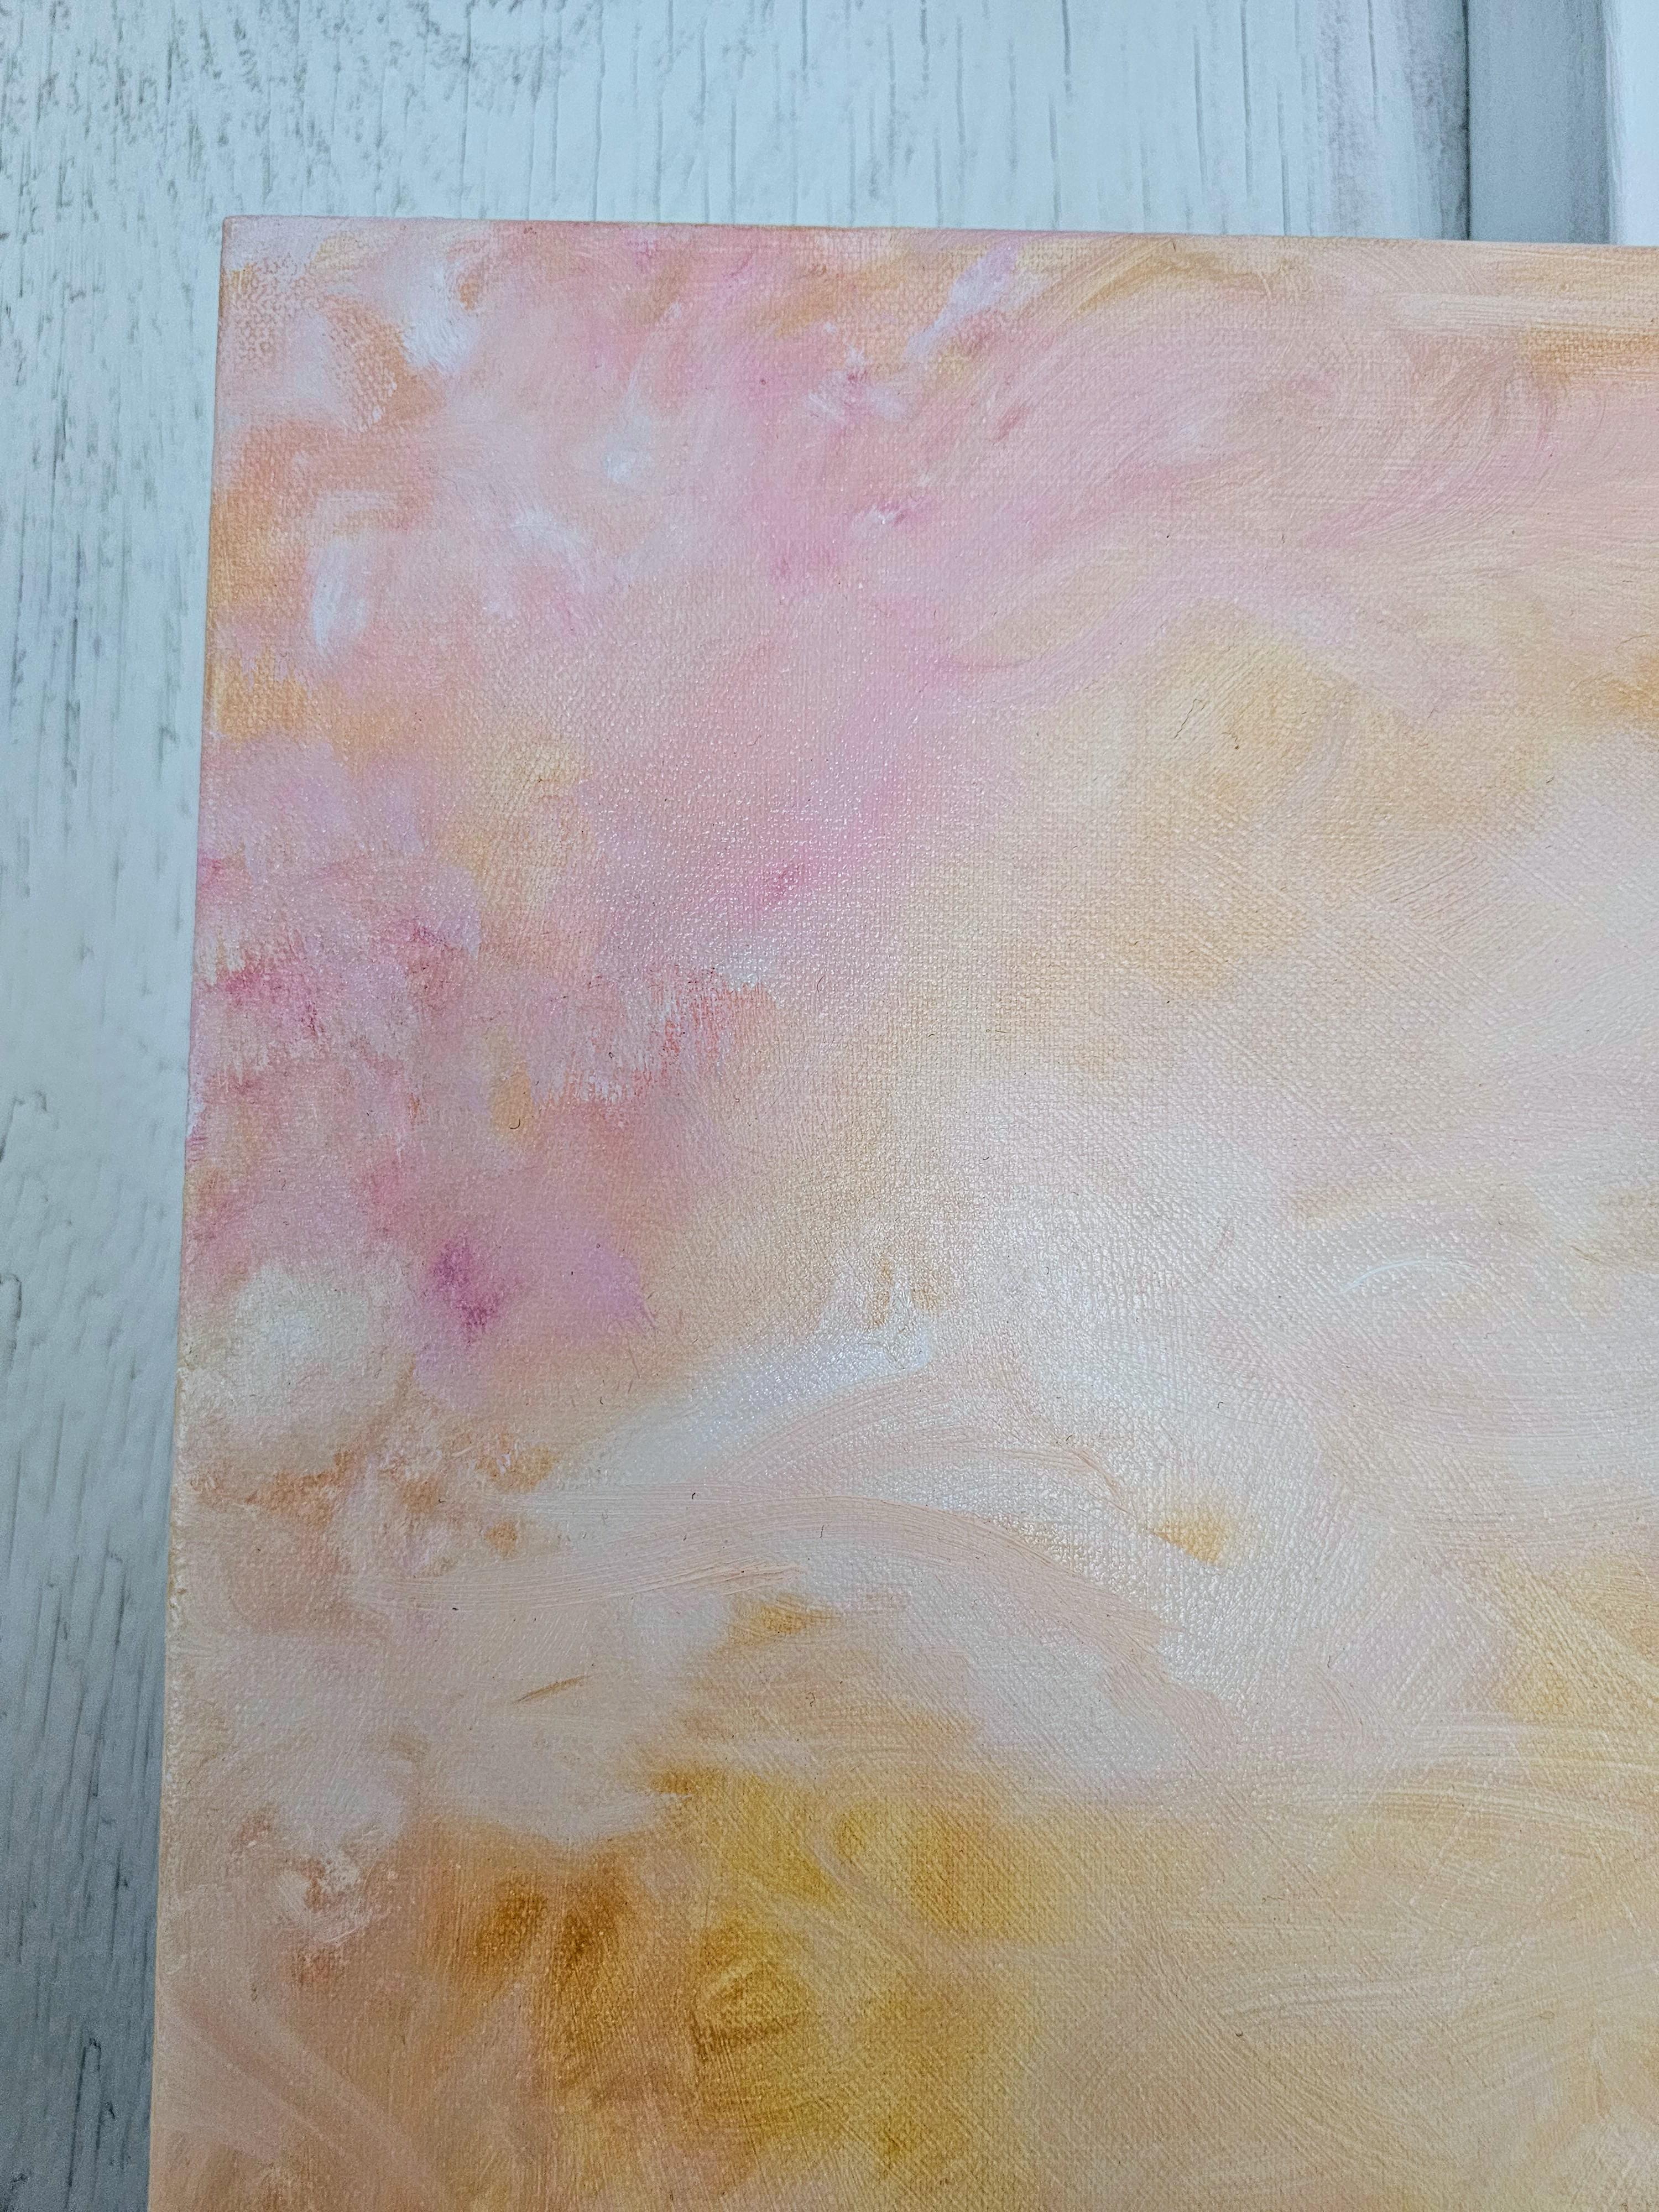 Grand rising - Large peach fuzz color abstract landscape painting For Sale 11